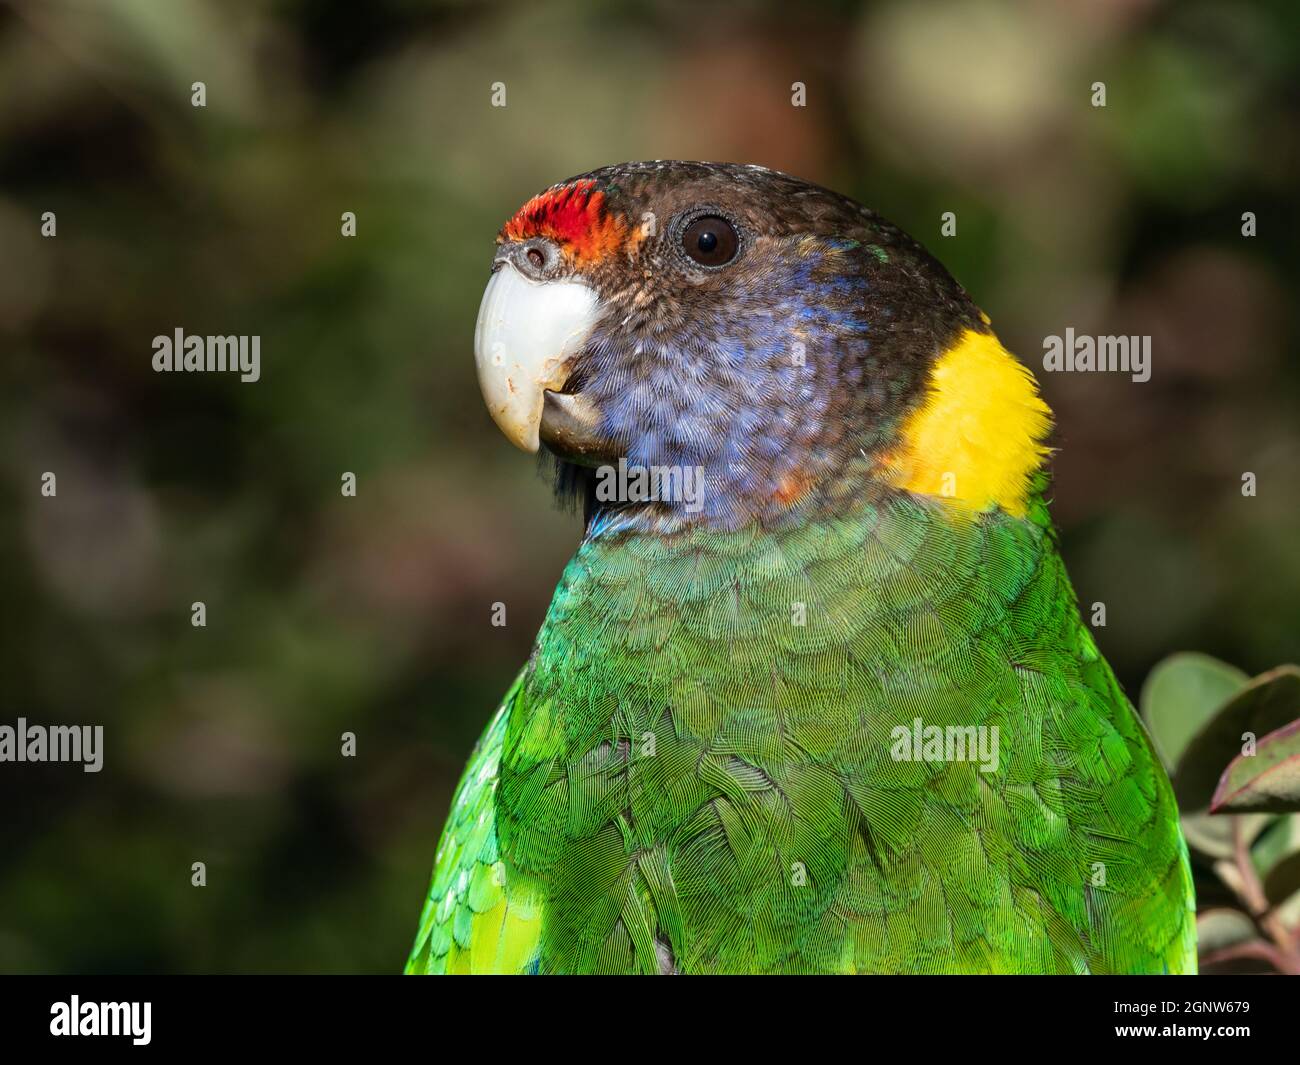 A portrait of an Australian Ringneck of the western race, known as the Twenty-eight Parrot, photographed in a forest of southwestern Australia. Stock Photo